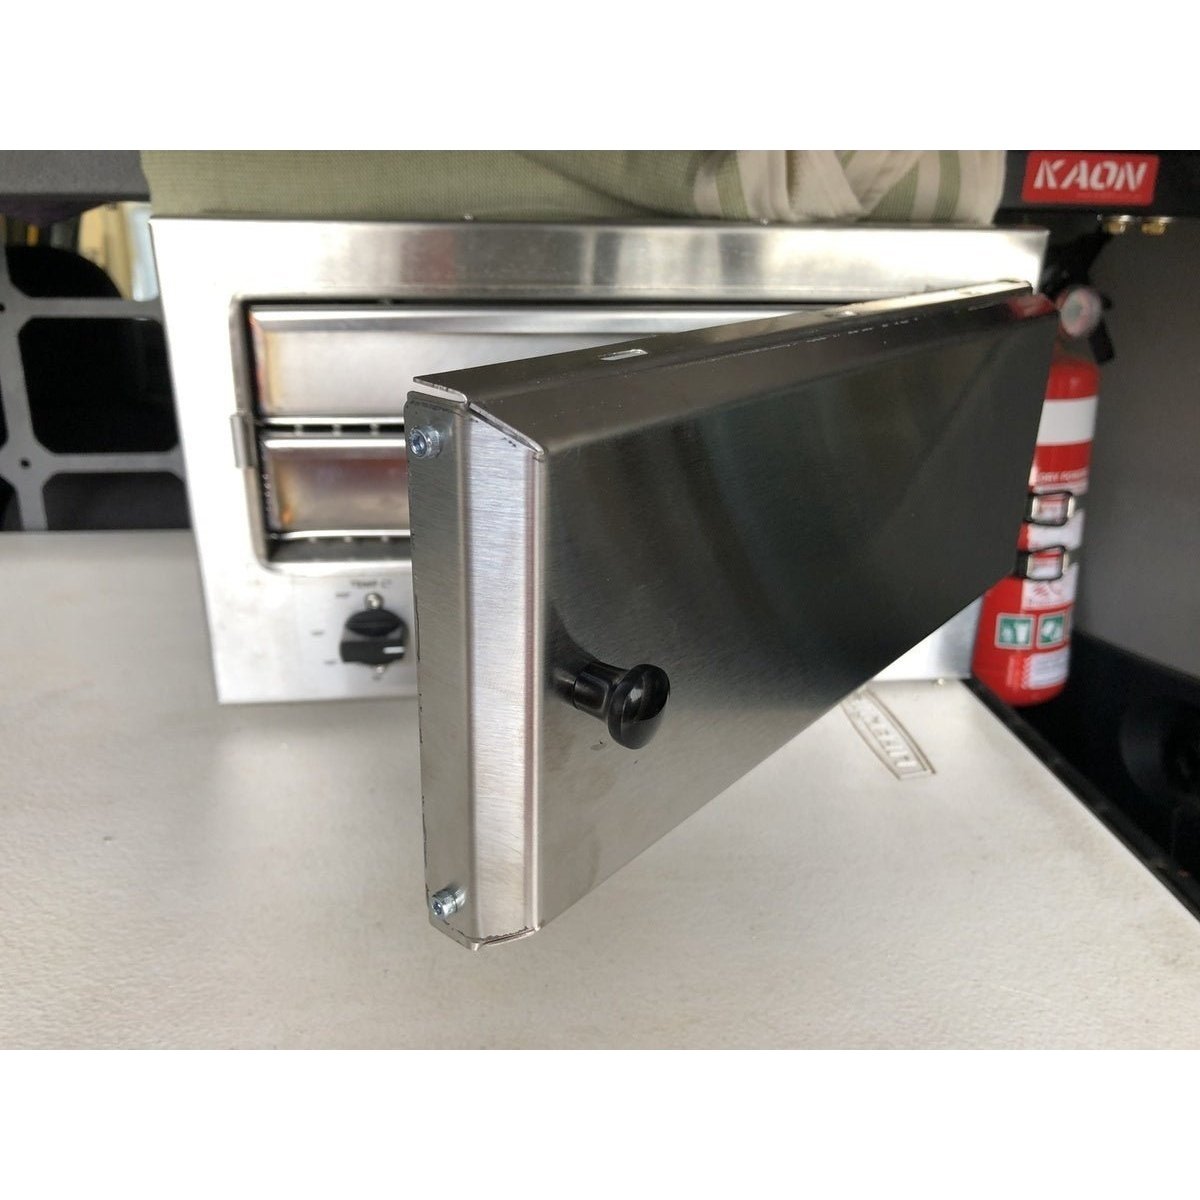 Insulated Oven Door Cover to suit Travel Buddy 12V Marine - AMD Touring